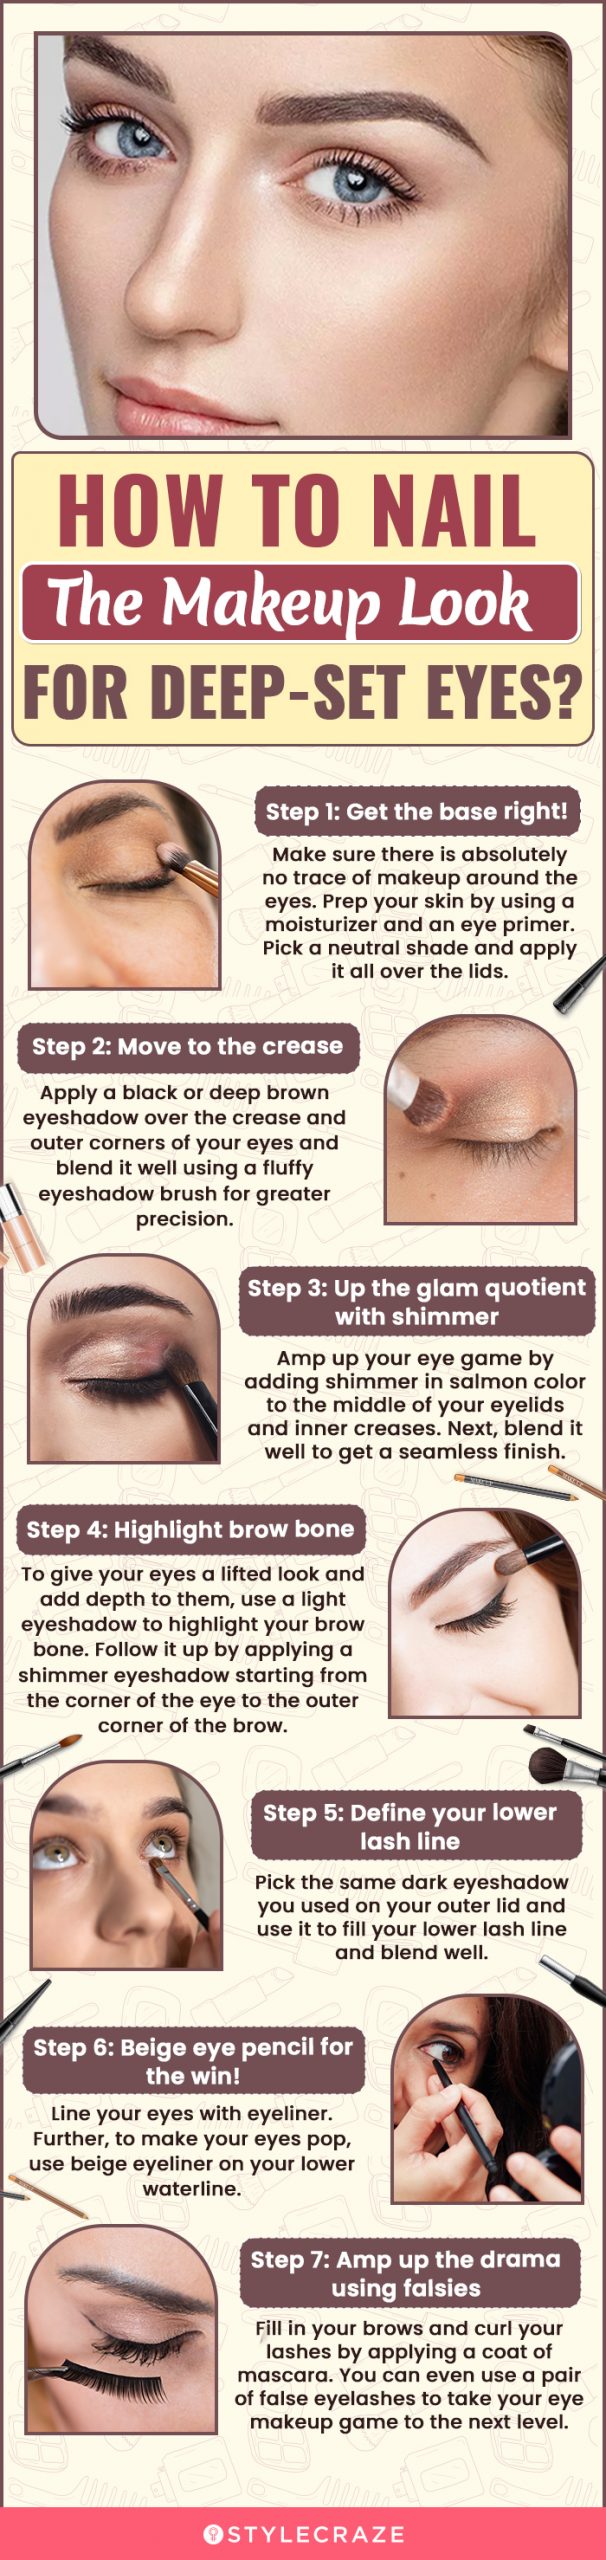 how to nail the makeup look for deep set eyes (infographic)